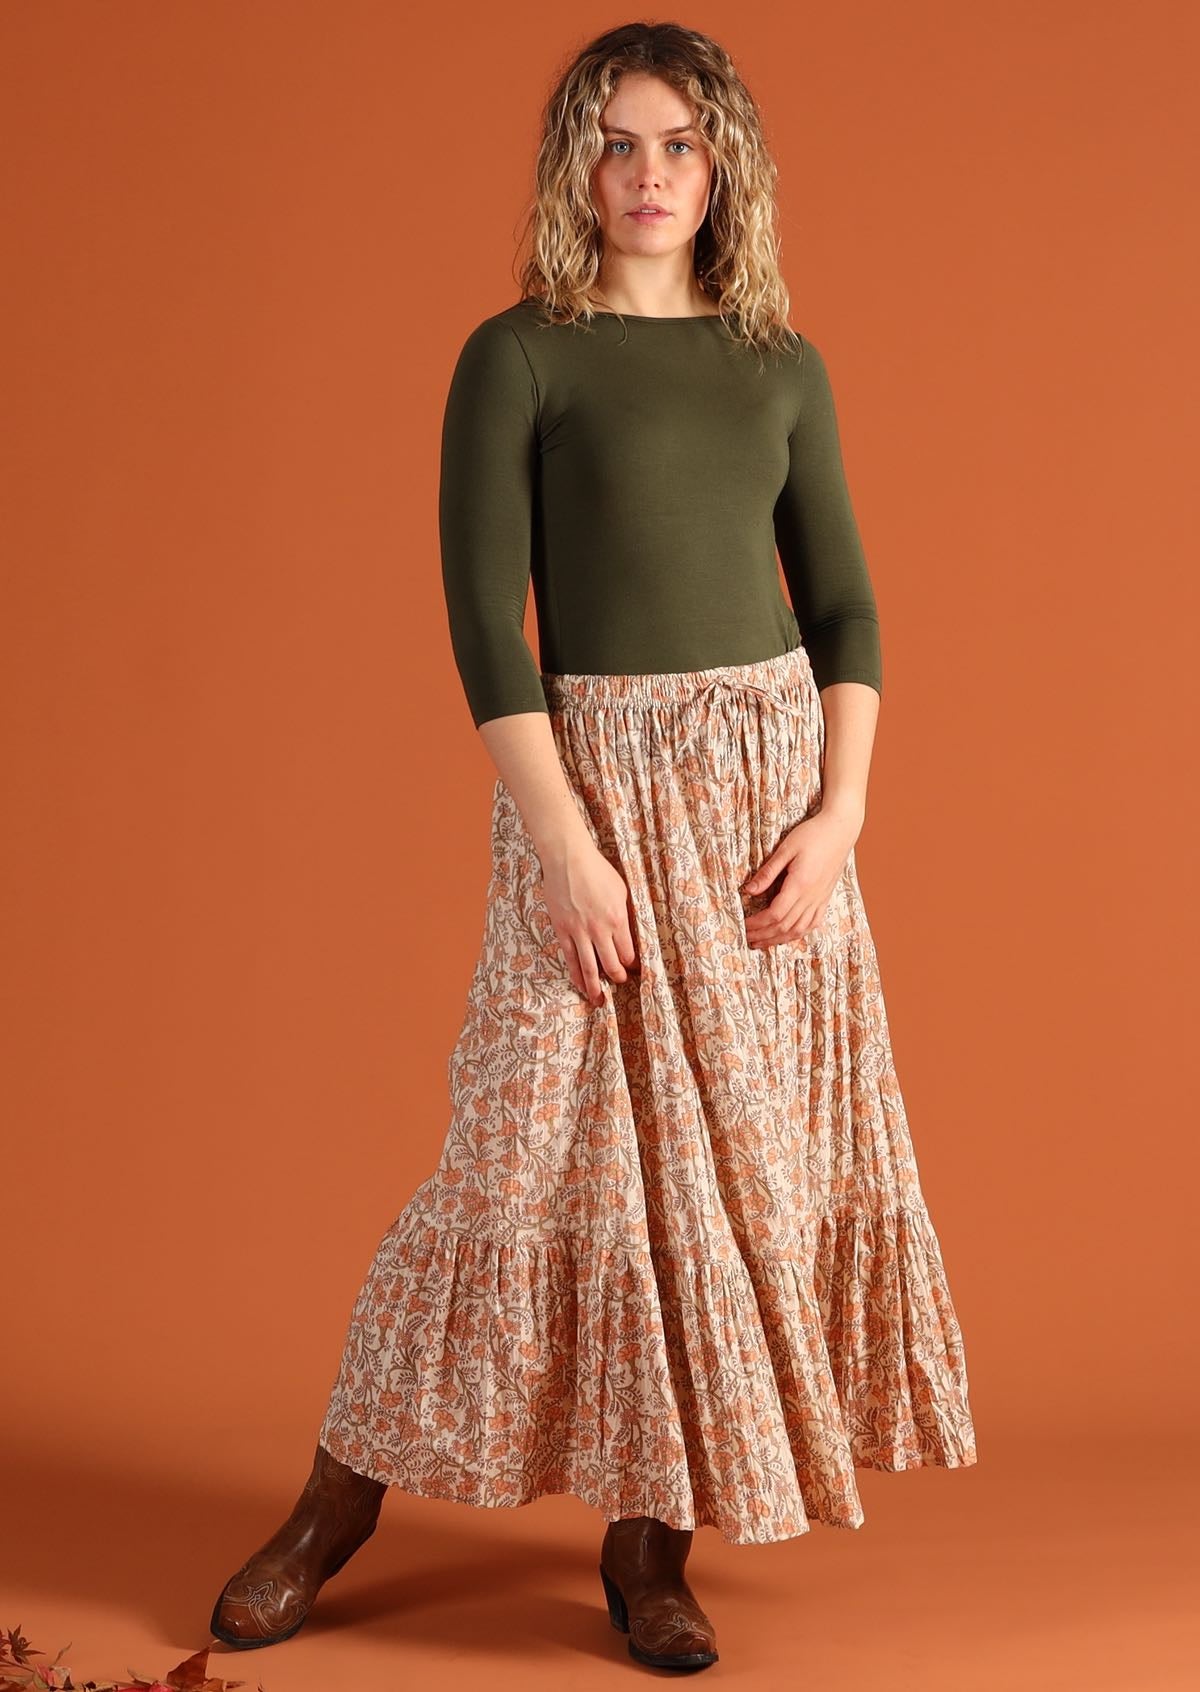 Woman wears 100% cotton peach and beige maxi skirt